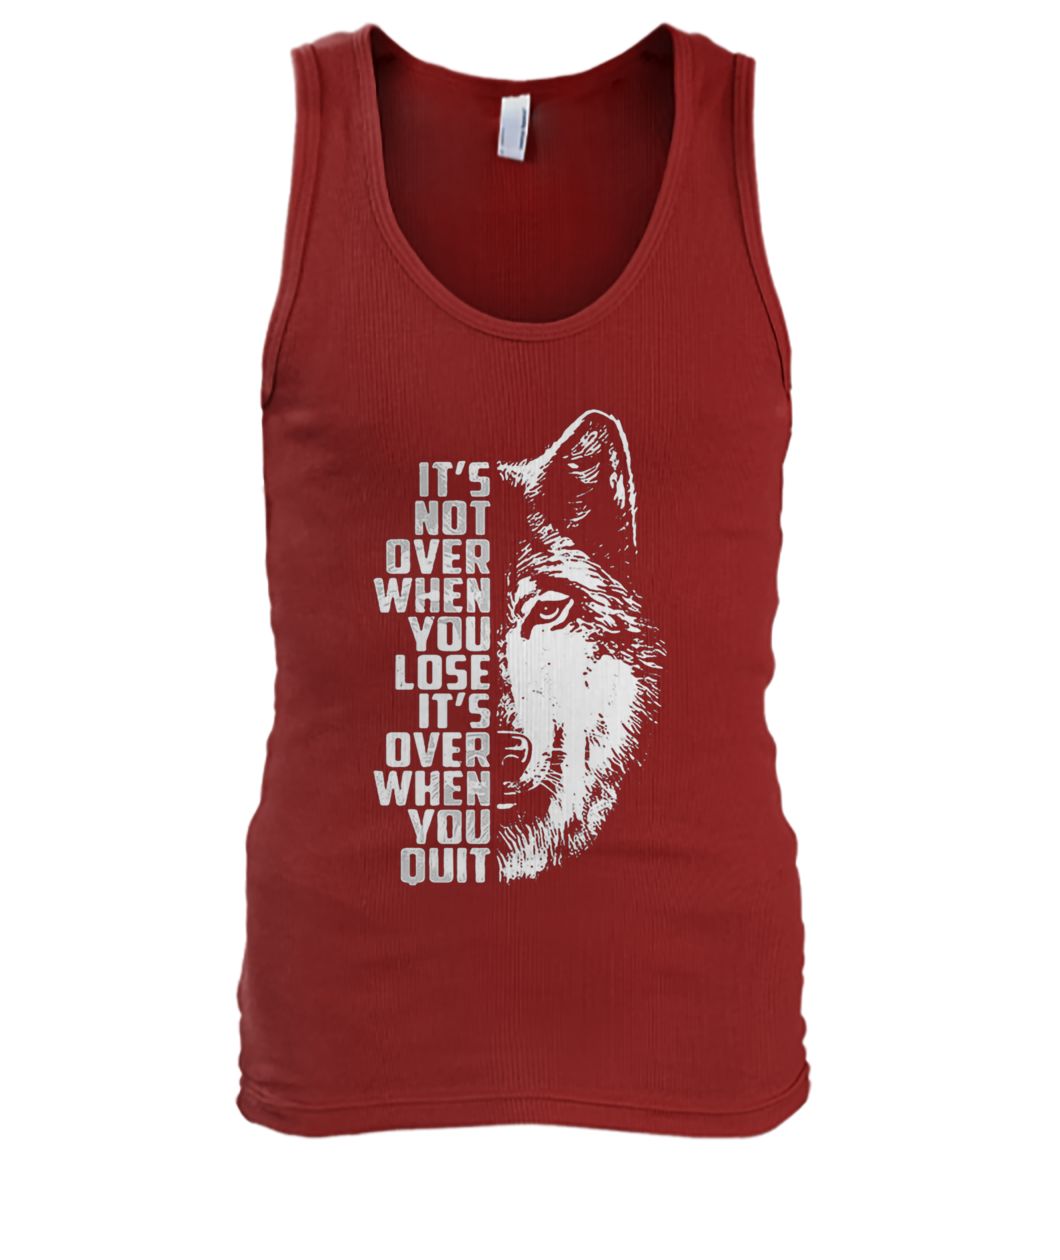 Wolf it's not over when you lose it's over when you quit men's tank top